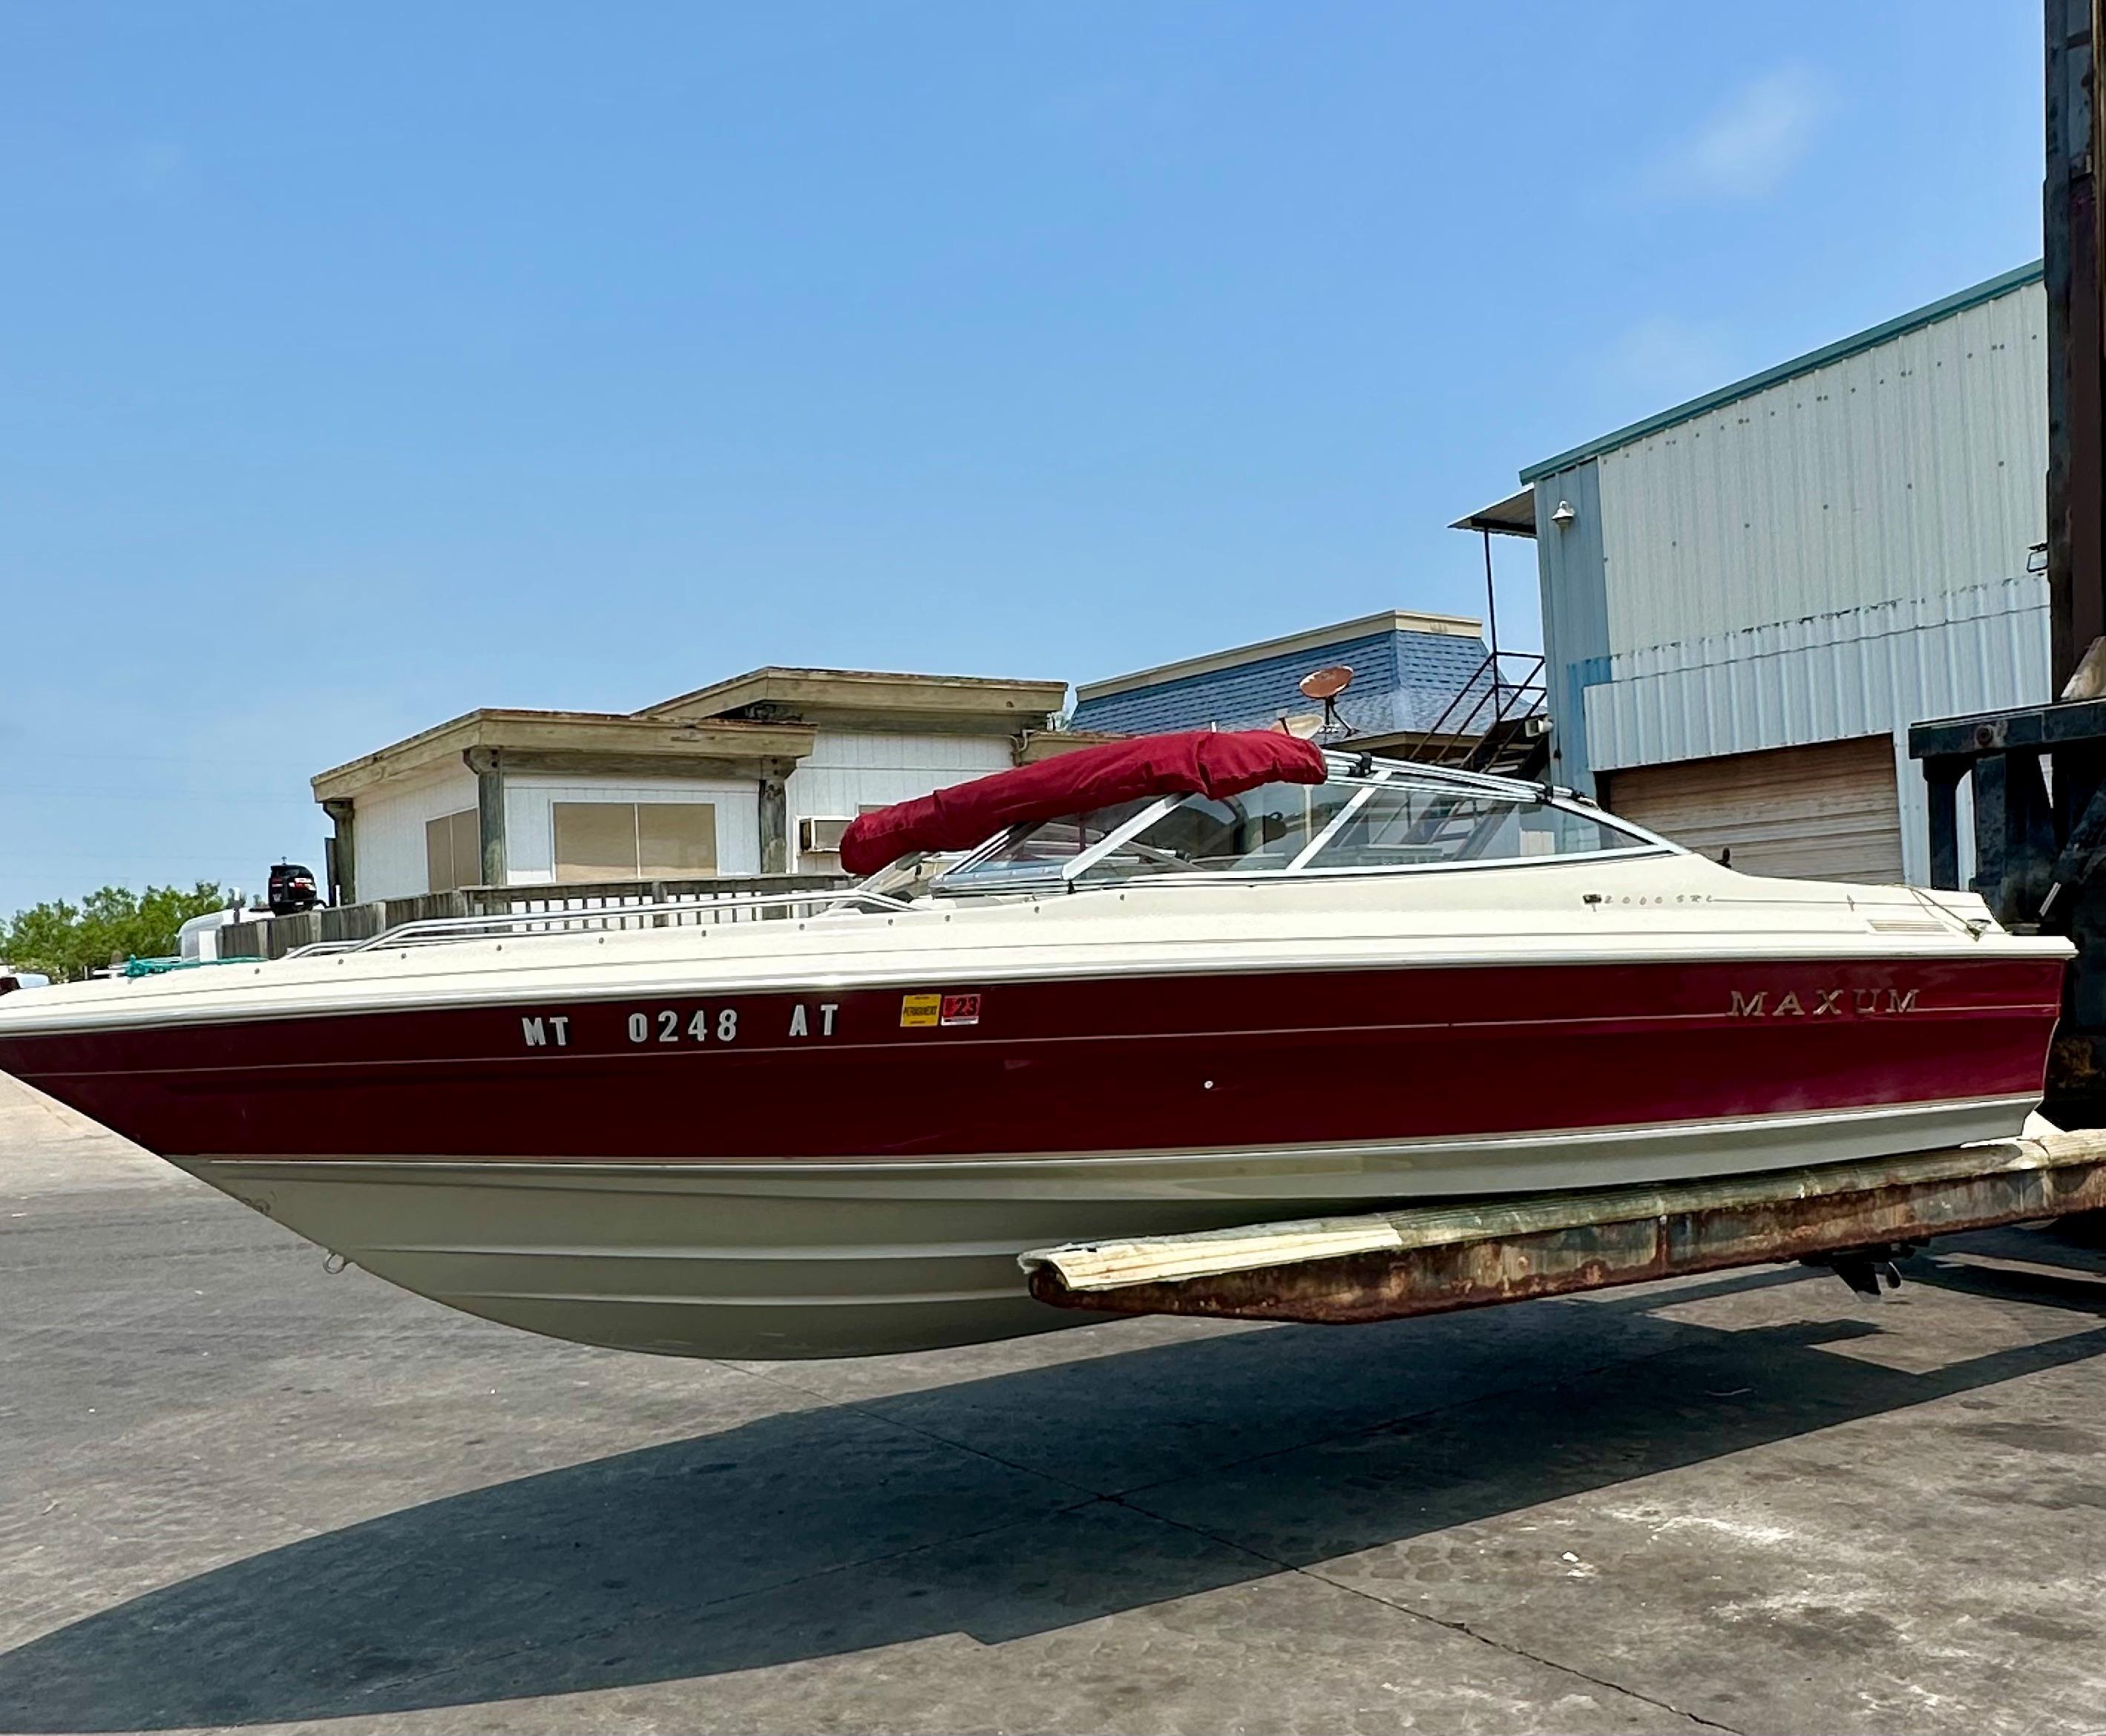 For sale boat Maxum 2100sr, 1996 250 hp with low mileage. Performed all maintenance, oil change, fil